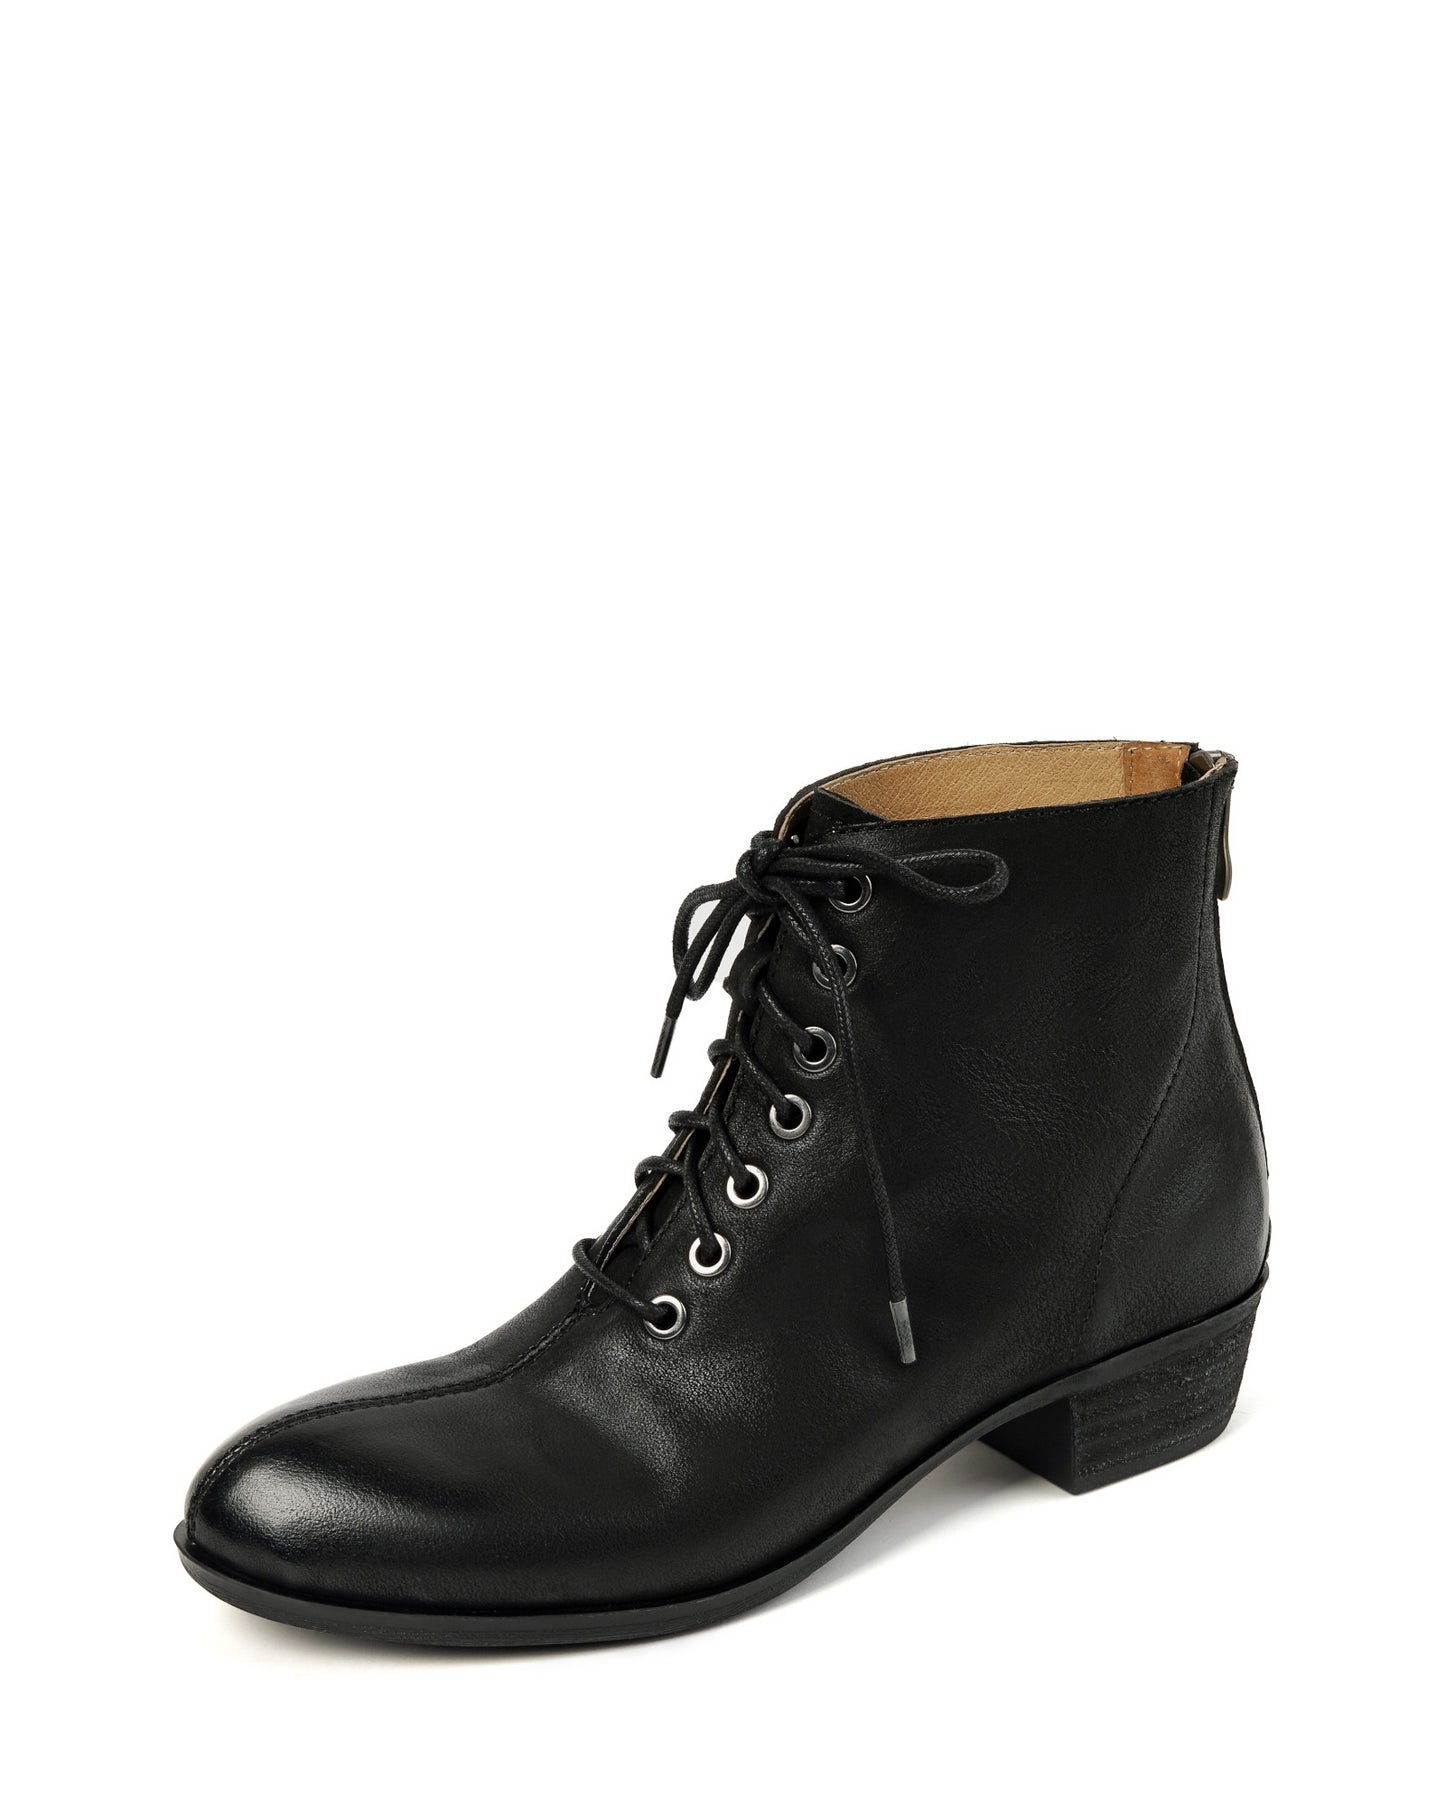 Kenora-ankle-boots-black-leather